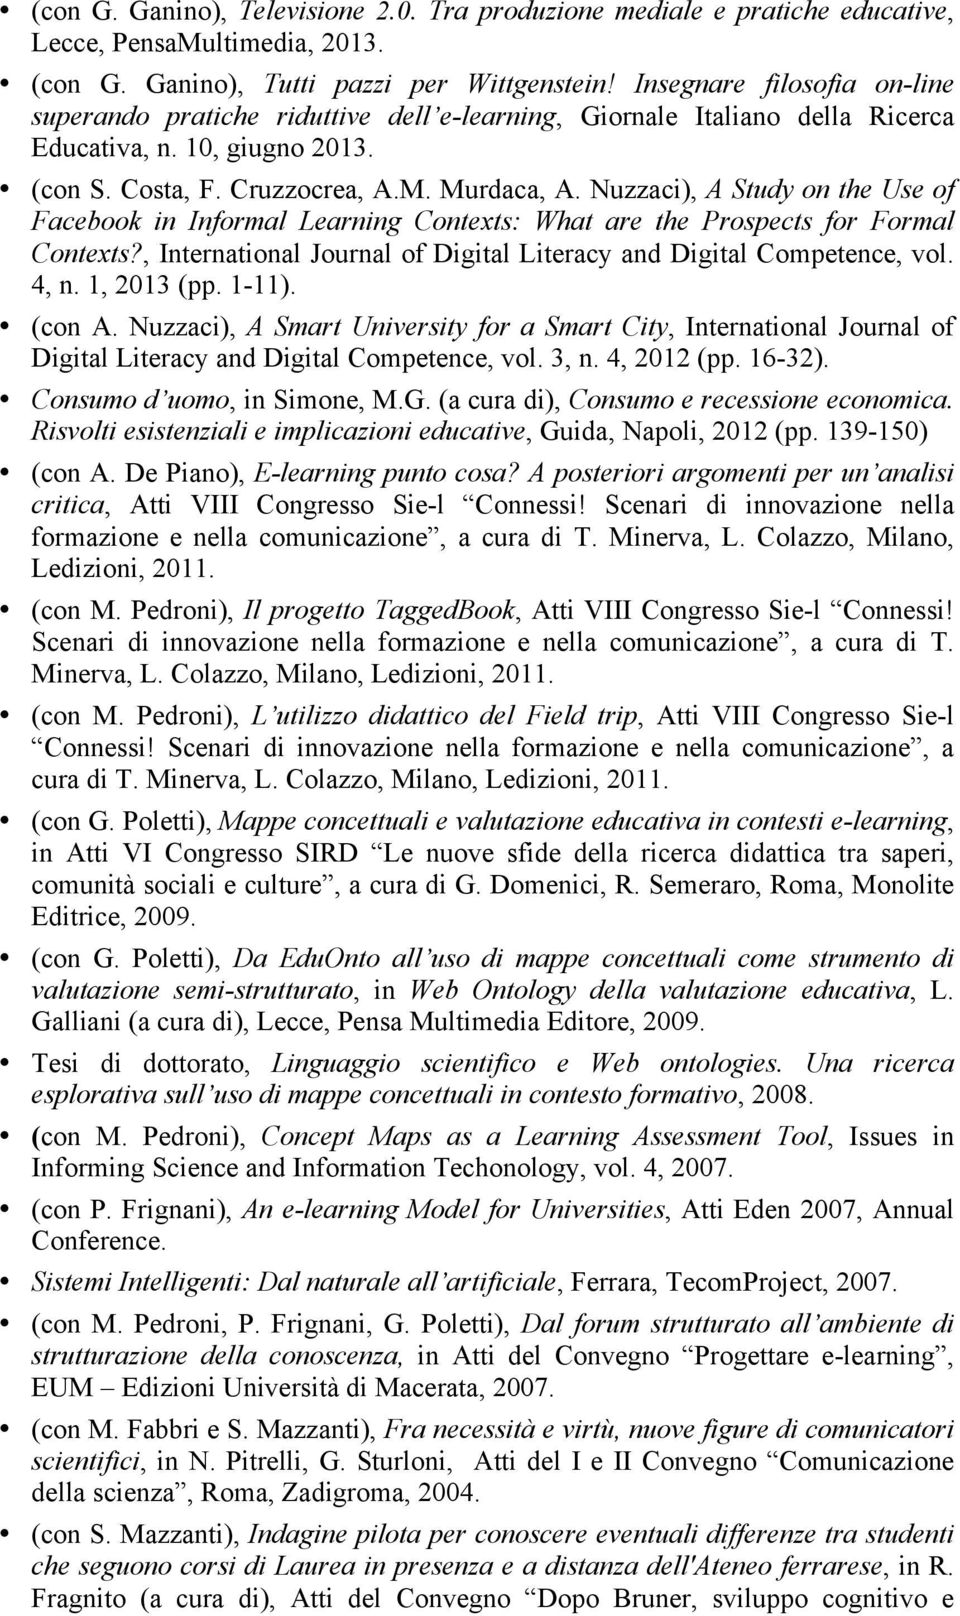 Nuzzaci), A Study on the Use of Facebook in Informal Learning Contexts: What are the Prospects for Formal Contexts?, International Journal of Digital Literacy and Digital Competence, vol. 4, n.